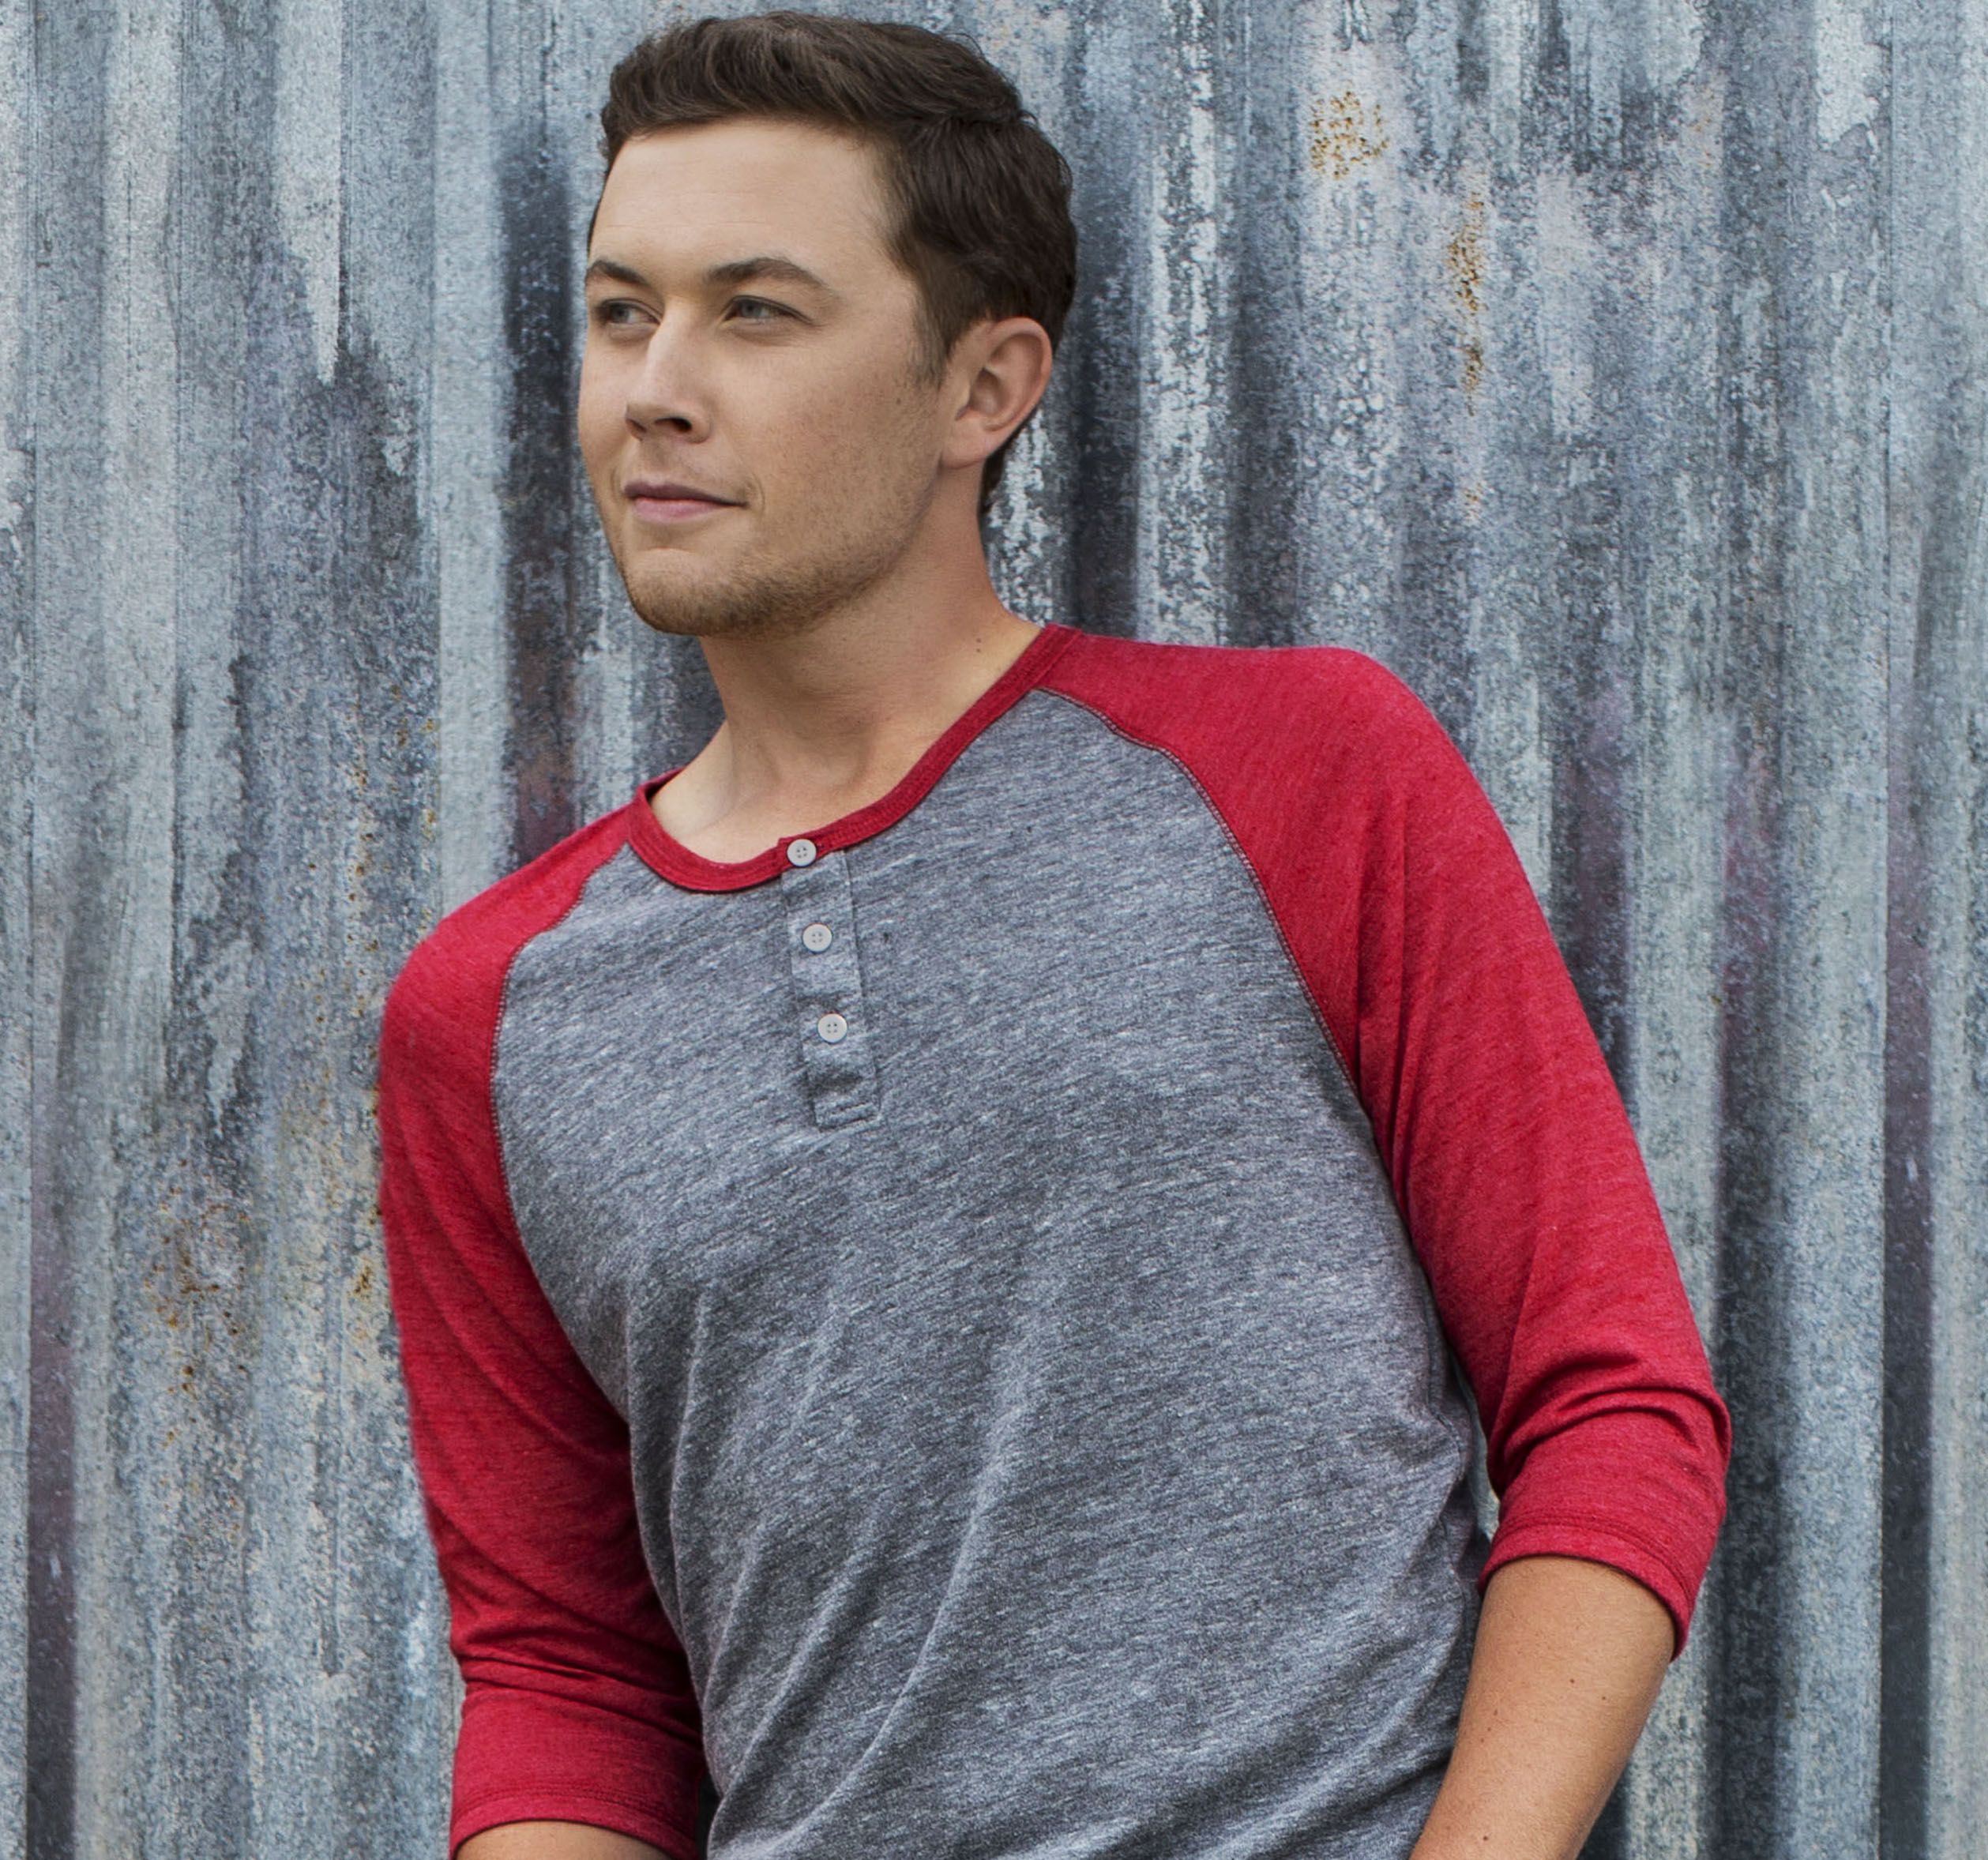 SCOTTY McCREERY RELEASES “SOUTHERN BELLE”